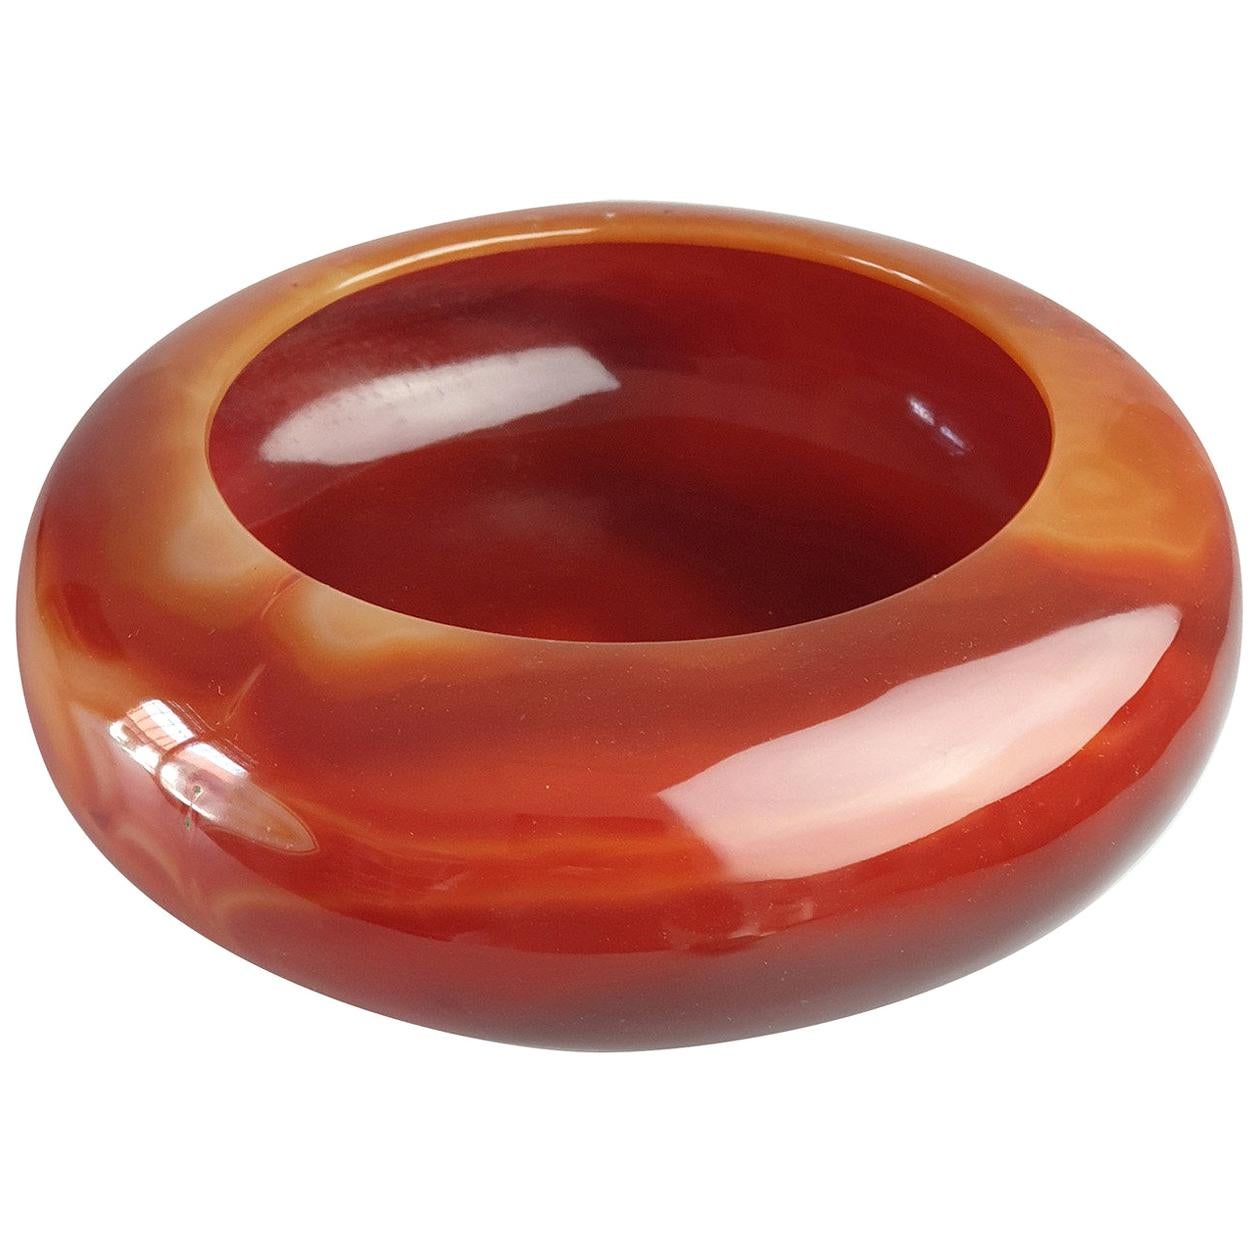 Small Carnelian Agate Empty-Pocket Bowl 6.5 For Sale